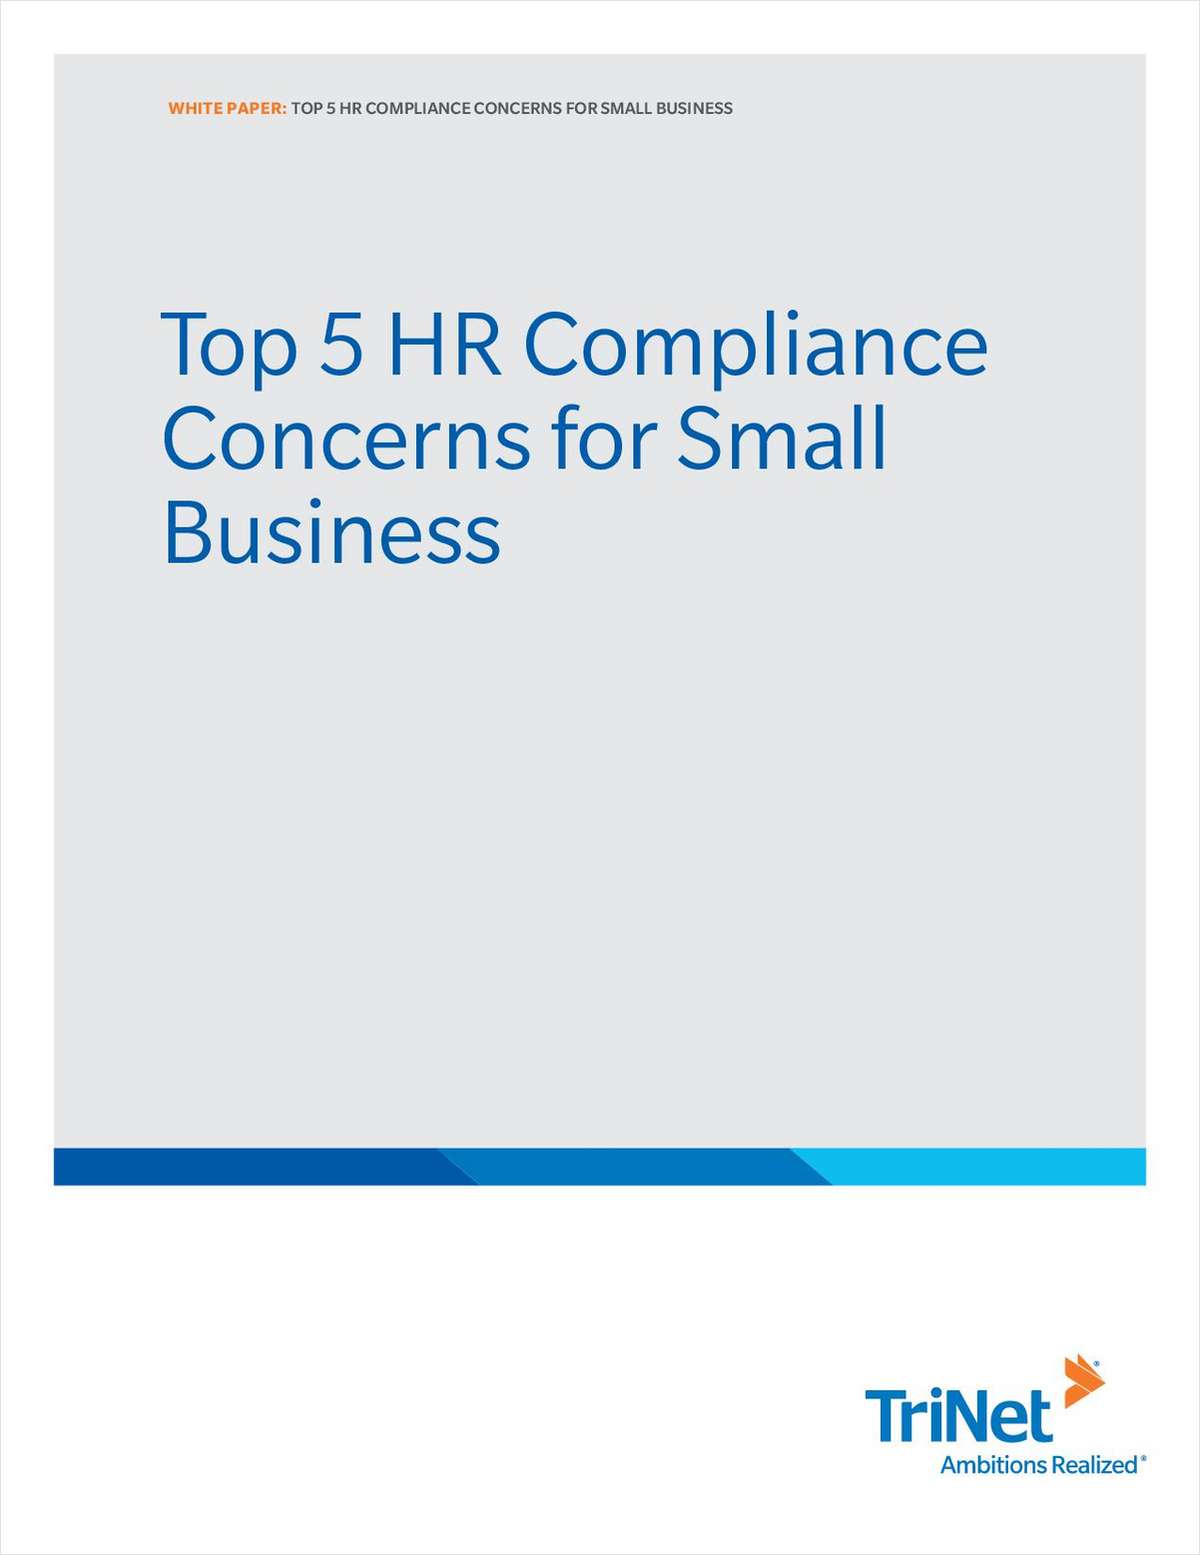 Top 5 HR Compliance Concerns for Small Business